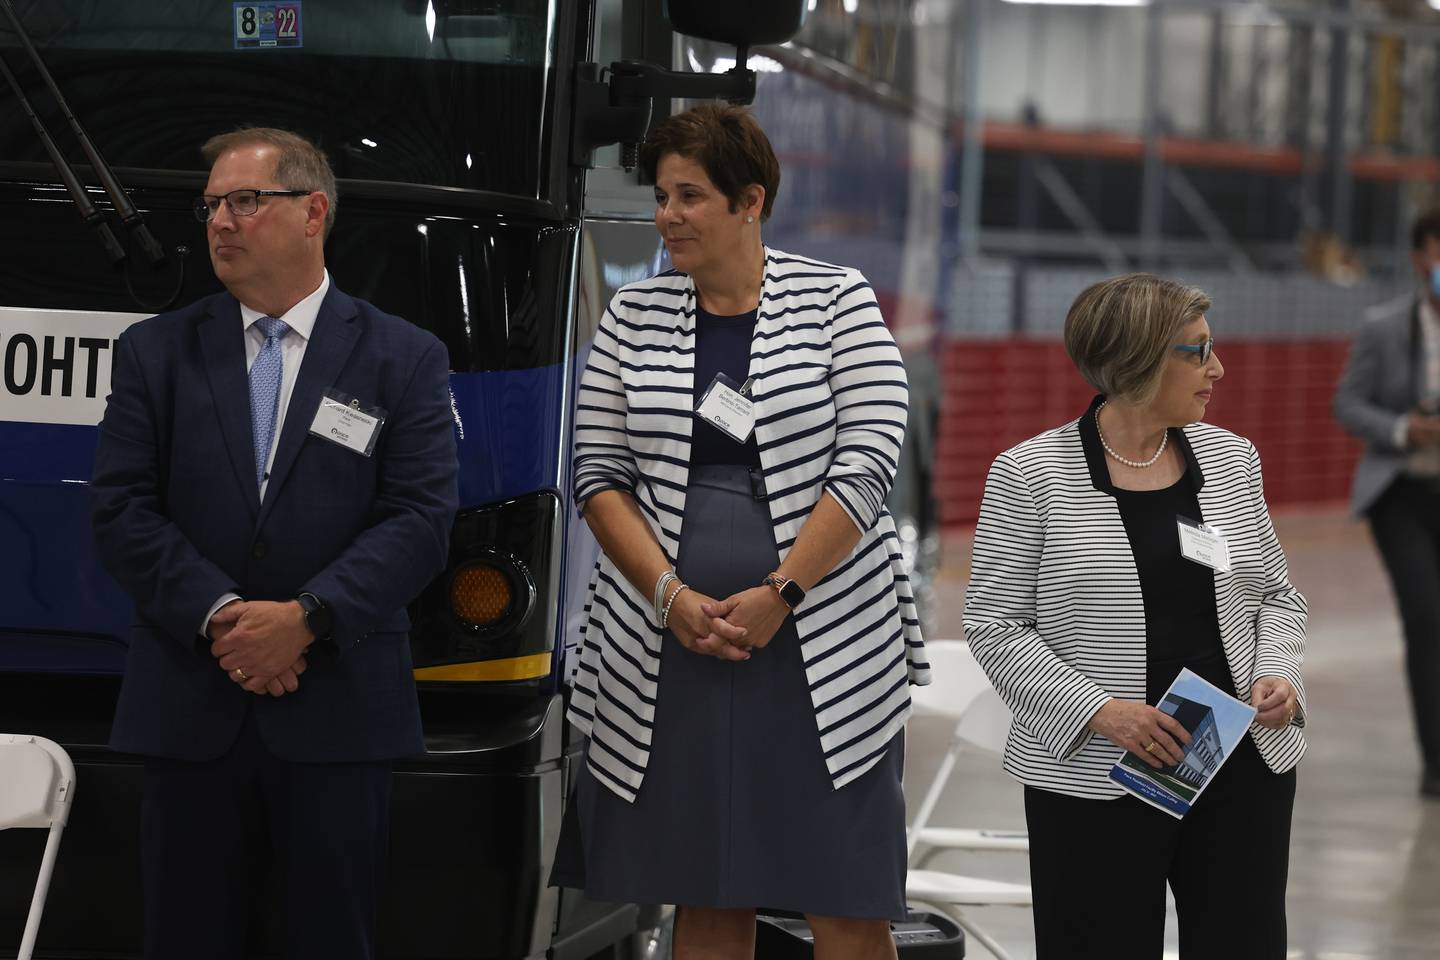 Will County Executive Jennifer Bertino-Tarrant, center, stands with Pace’s officials Rick Kwasneski and Melinda Metzger at Pace’s new 264,000 square foot state-of-the-art facility in Plainfield on Thursday. Thursday, July 21, 2022 in Plainfield.